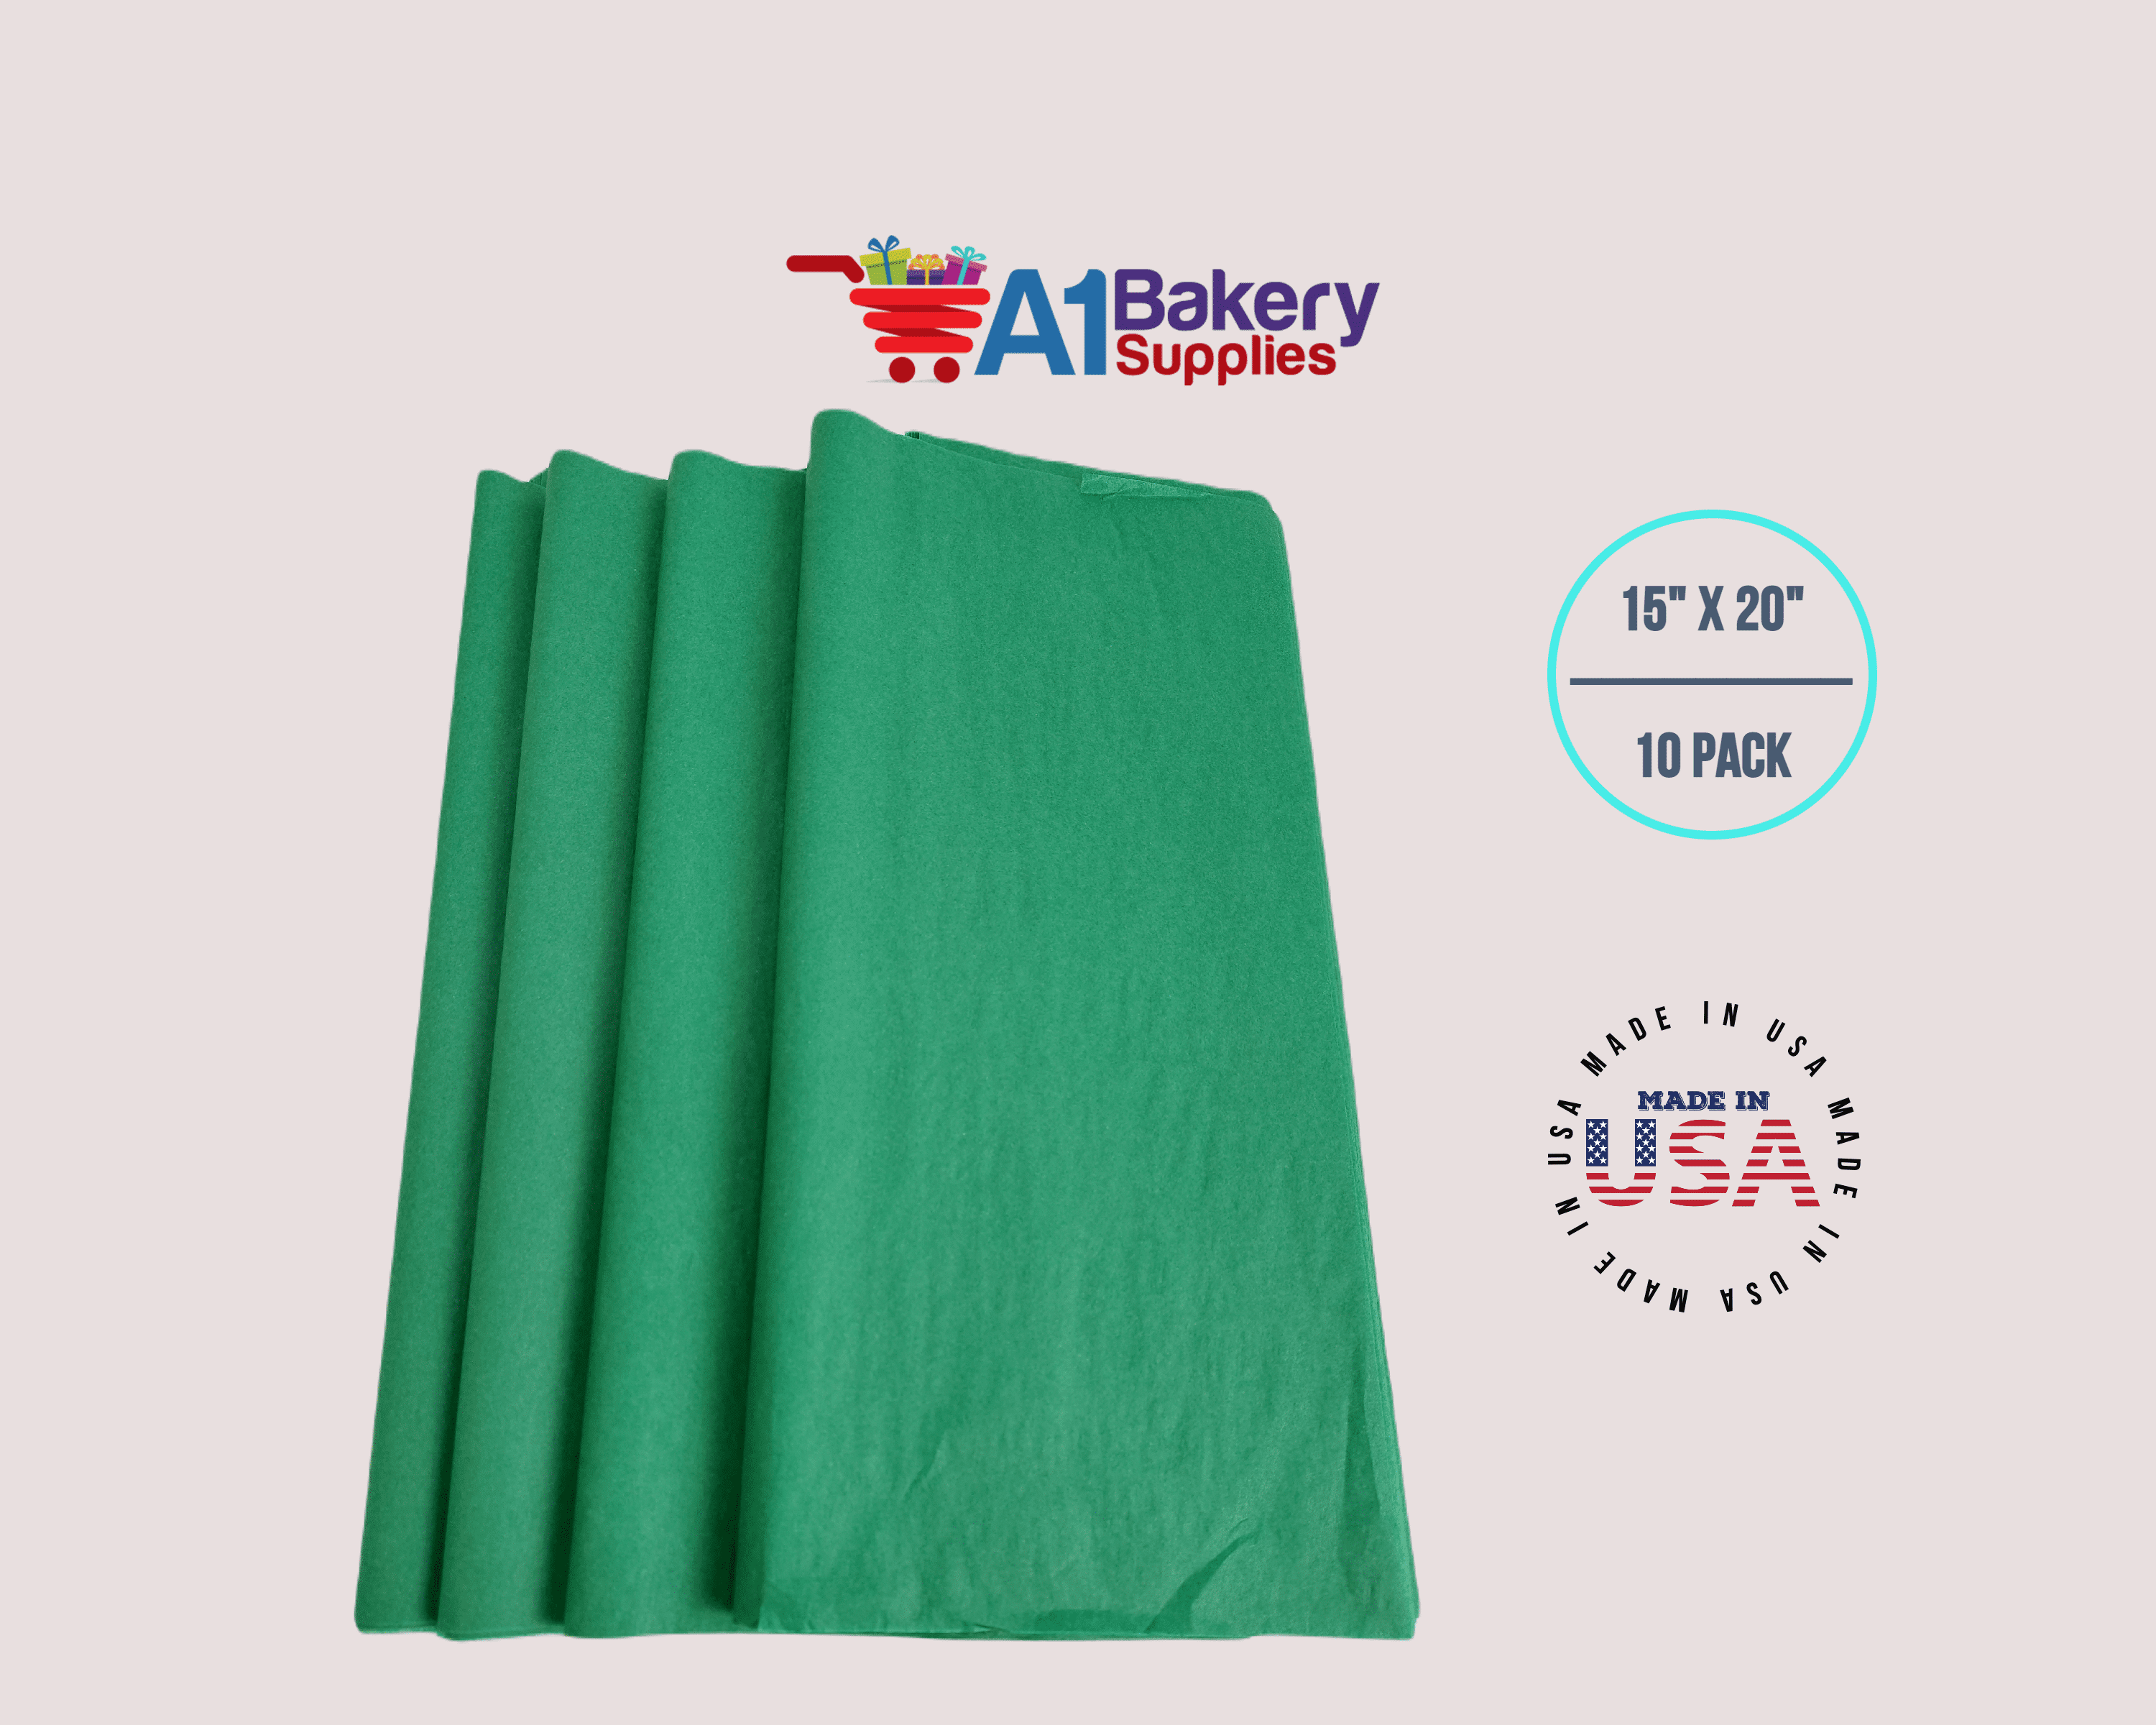  Hi Sasara 100 Sheets Assorted Green Tissue Paper Bulk,14 x 20  inch,Green Tissue Paper for Gift Bags,4 Green Colors Tissue for St.  Patrick's Day,Christmas,Wedding,Birthday : Health & Household